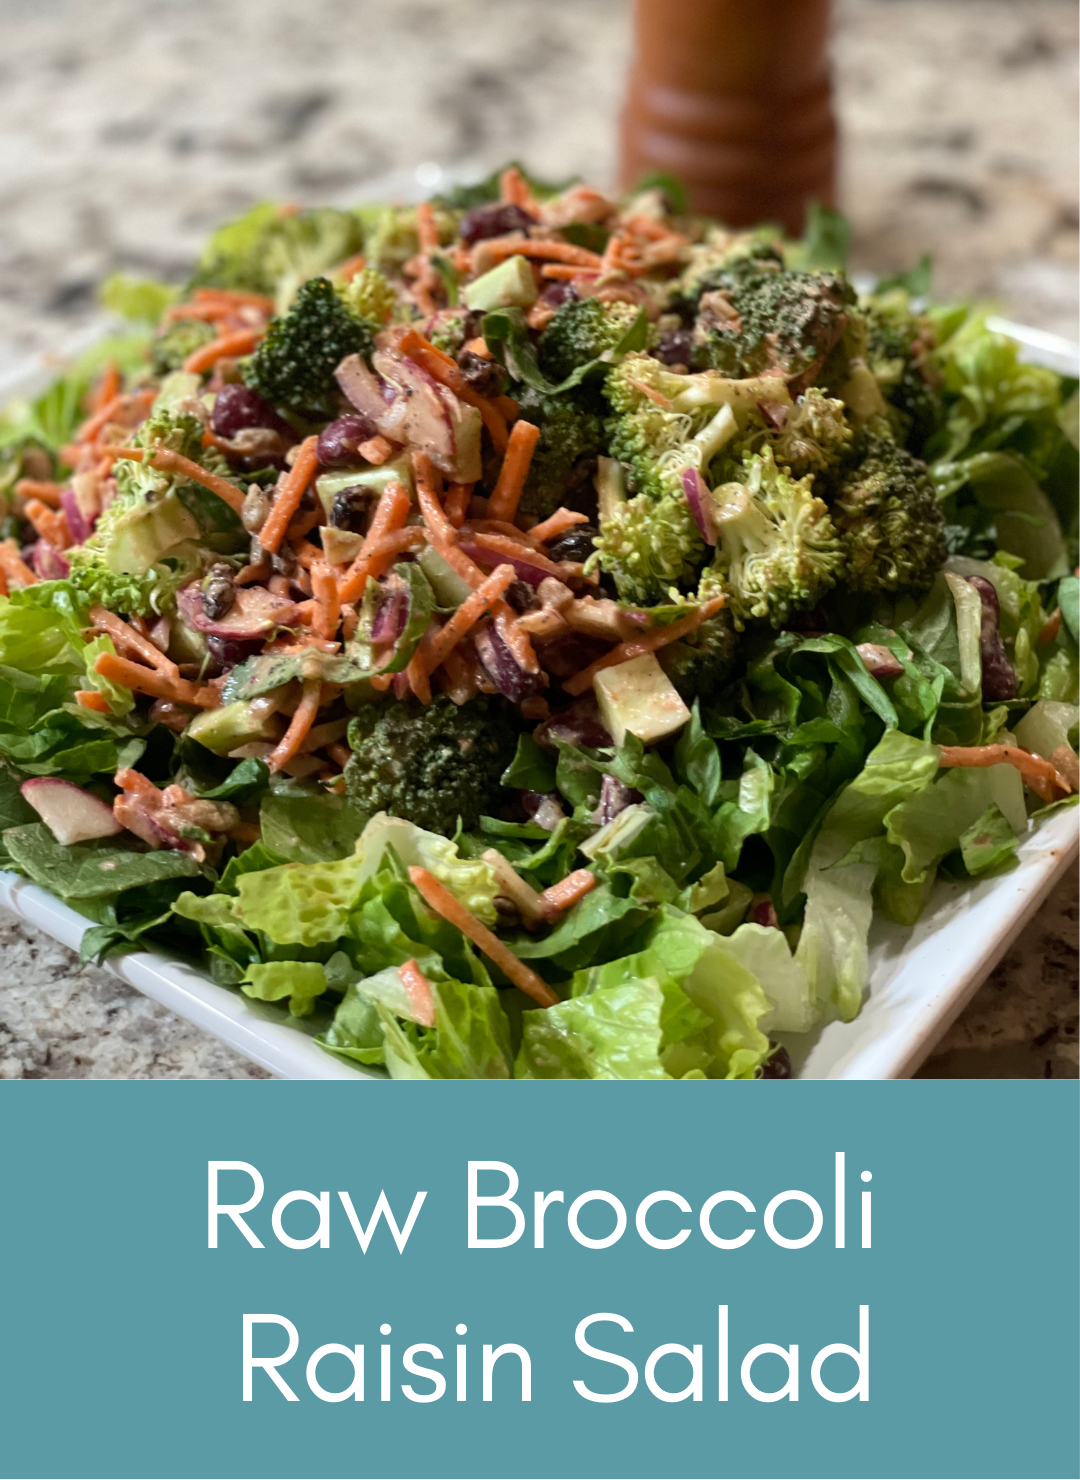 Plant-based whole food raw broccoli raisin salad Picture with link to recipe